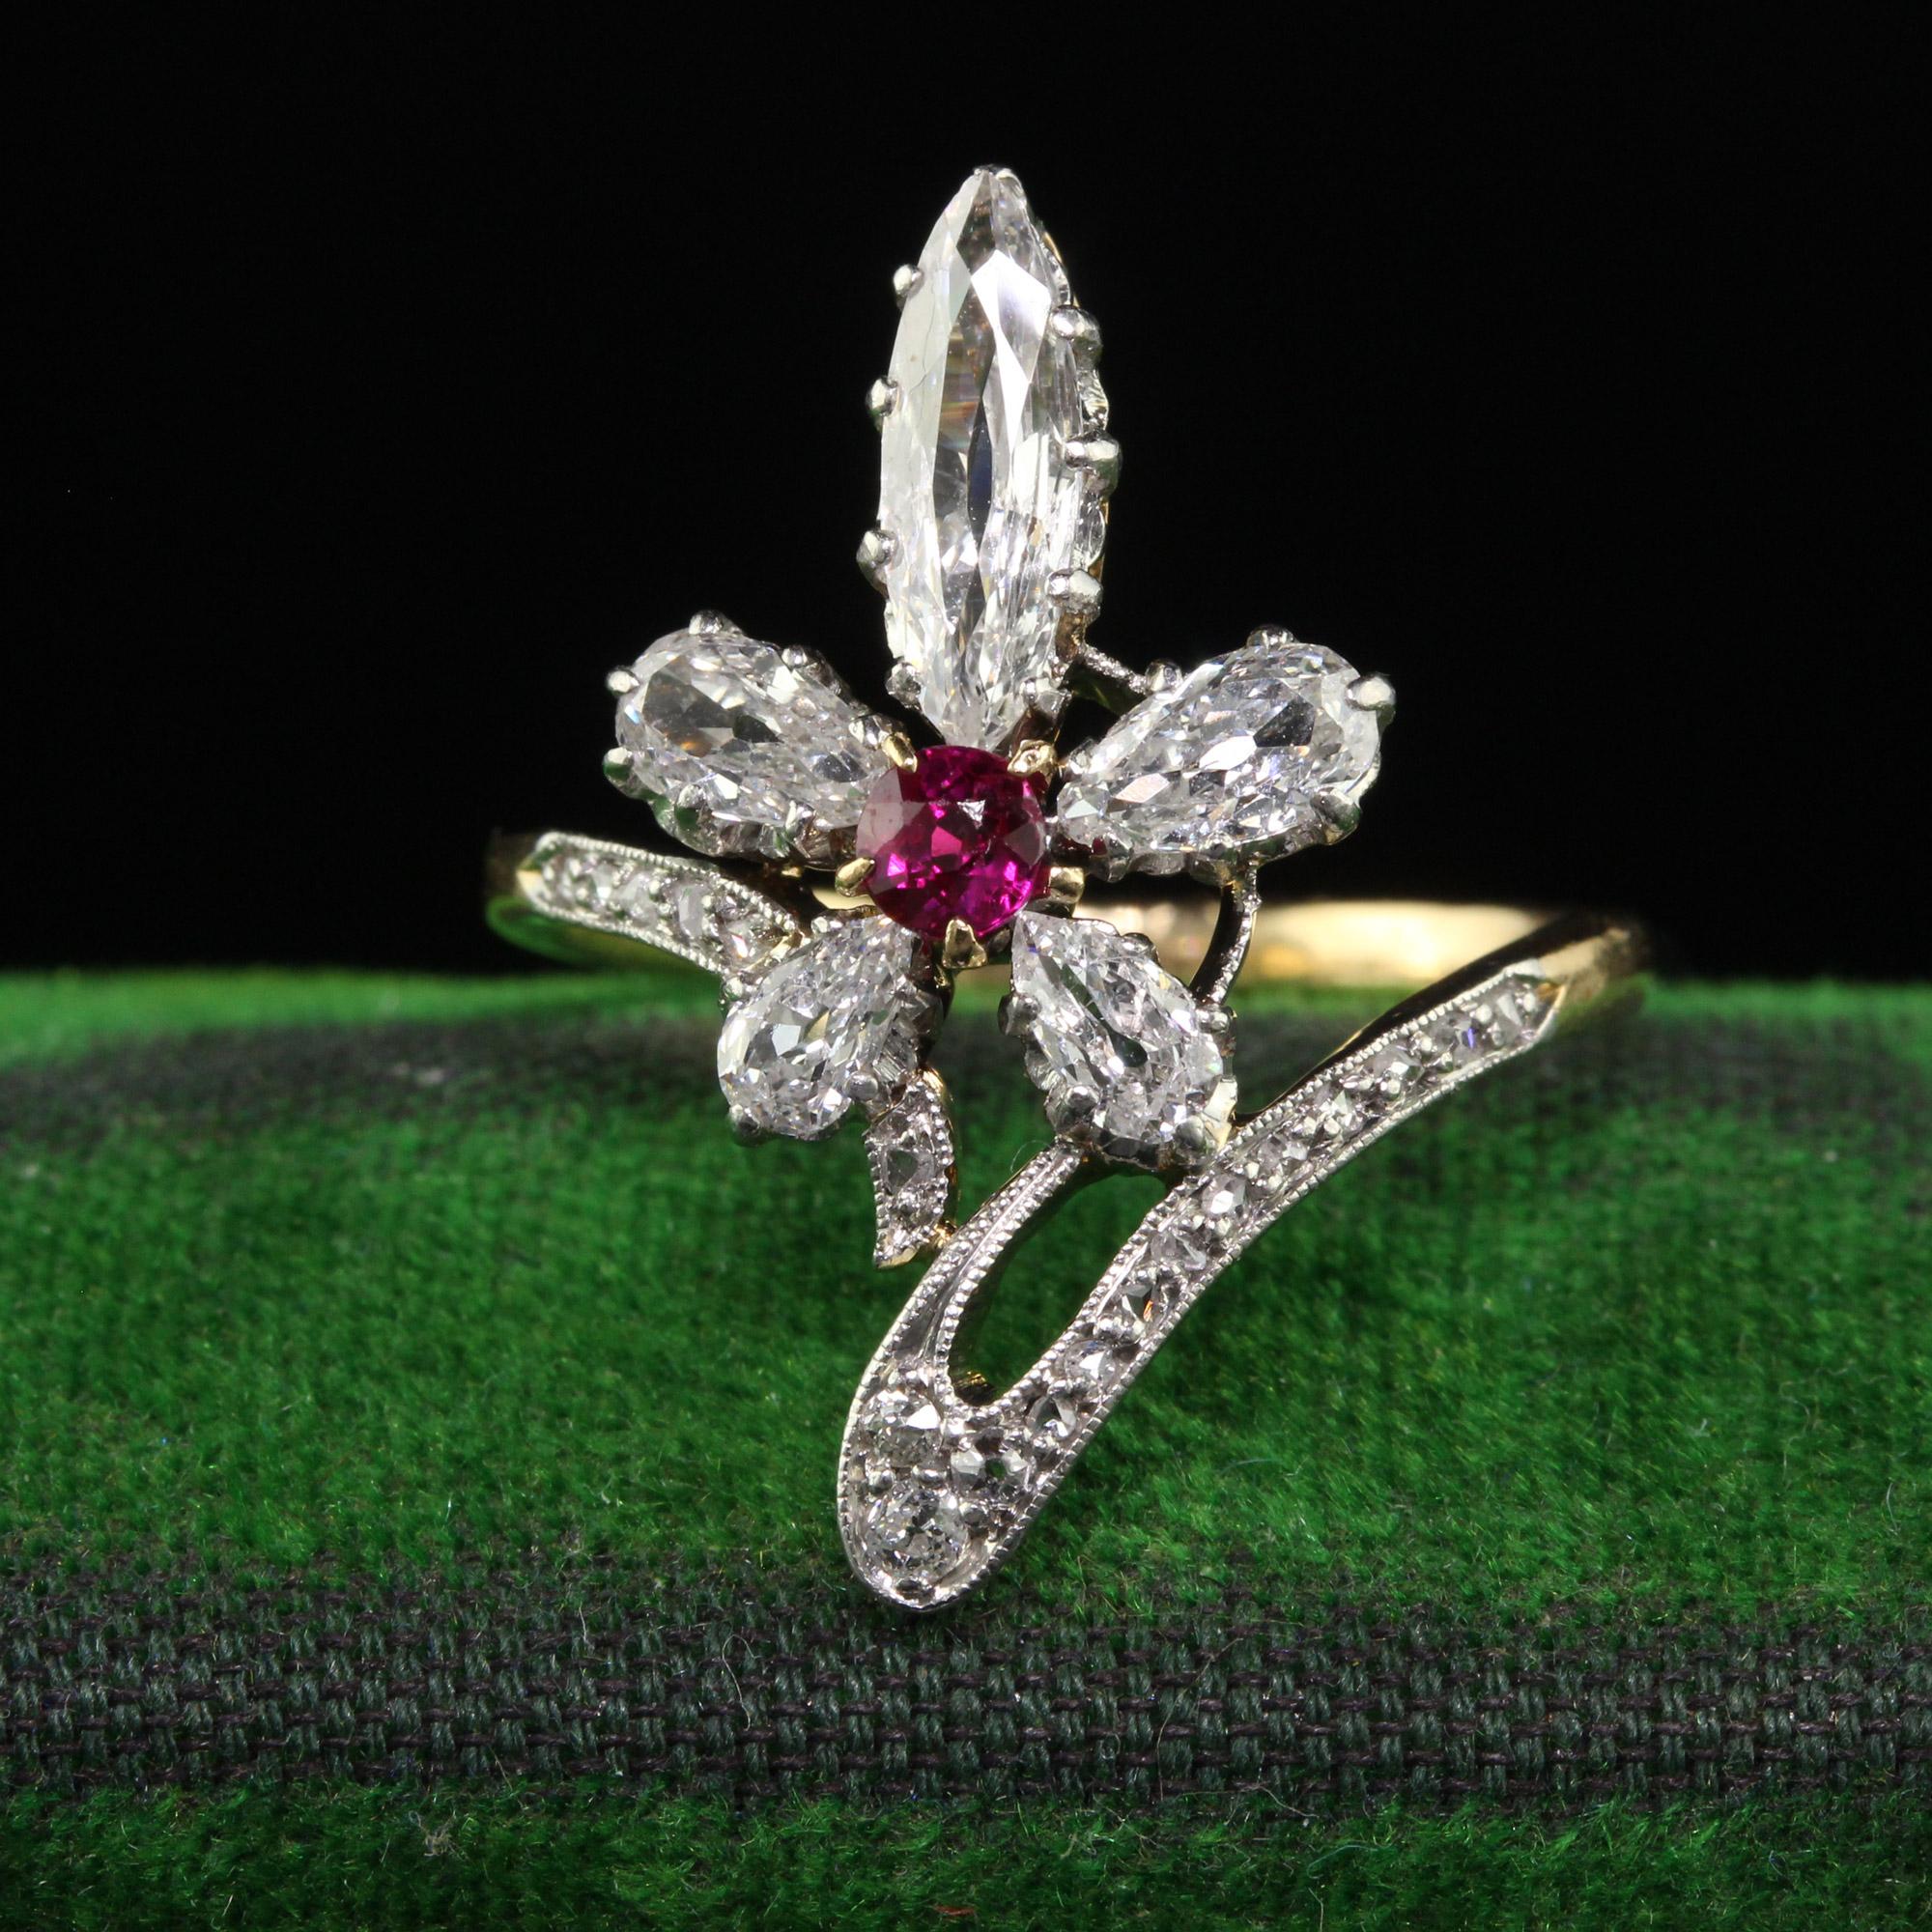 Beautiful Antique Edwardian 18K Gold and Platinum Old Marquise Diamond Ruby Cocktail Ring. This incredible Edwardian diamond ring is crafted in 18k yellow gold and platinum top. This ring features old cut marquise and pear shape diamonds that are